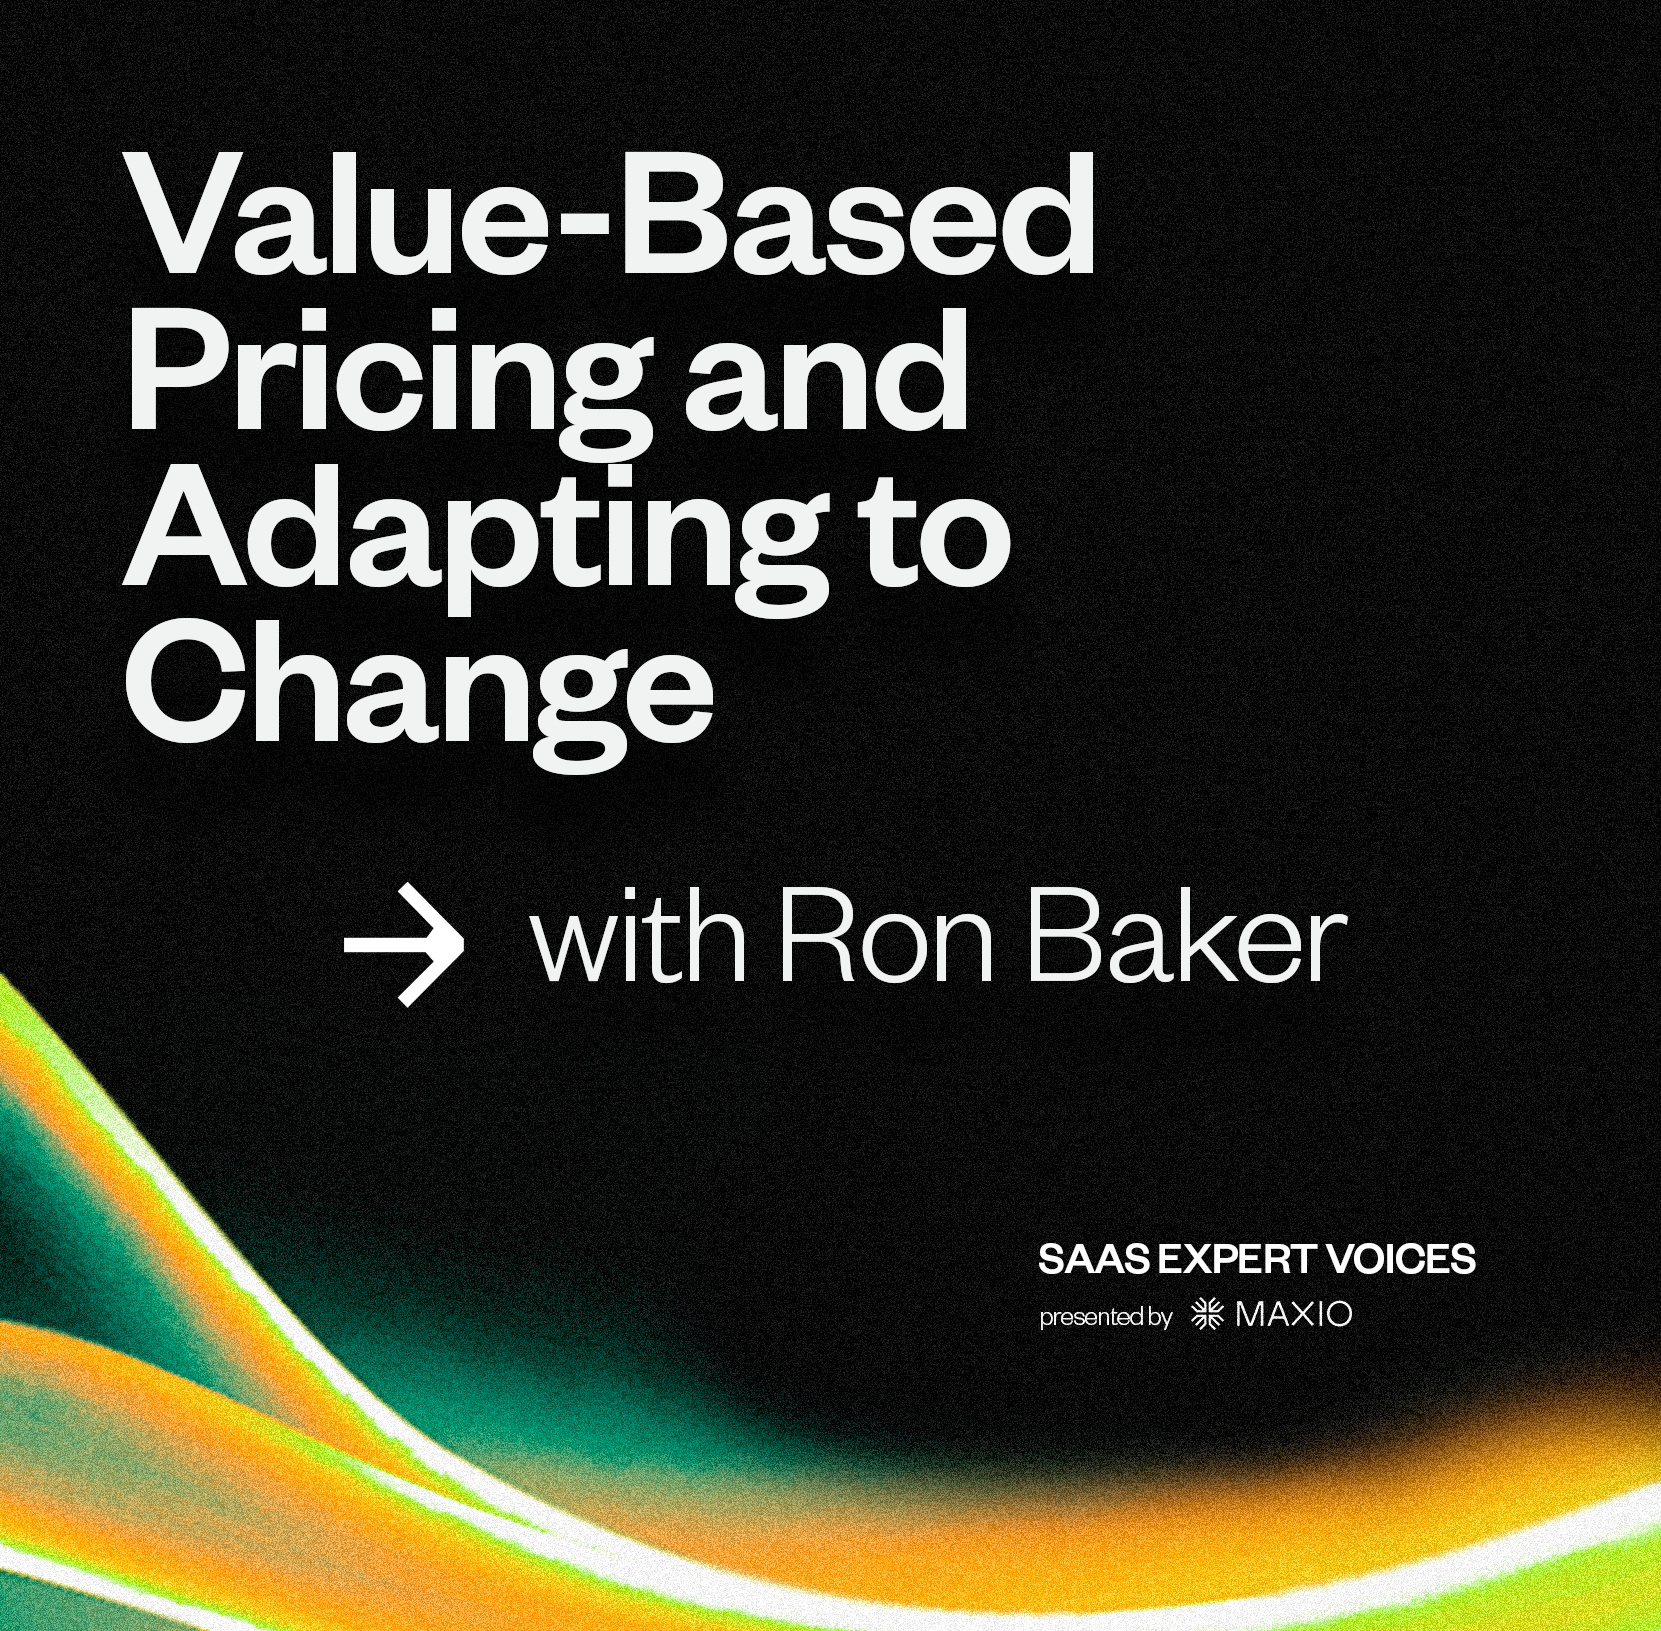 Podcast title: Value-based priing and adapting to change with Ron Baker